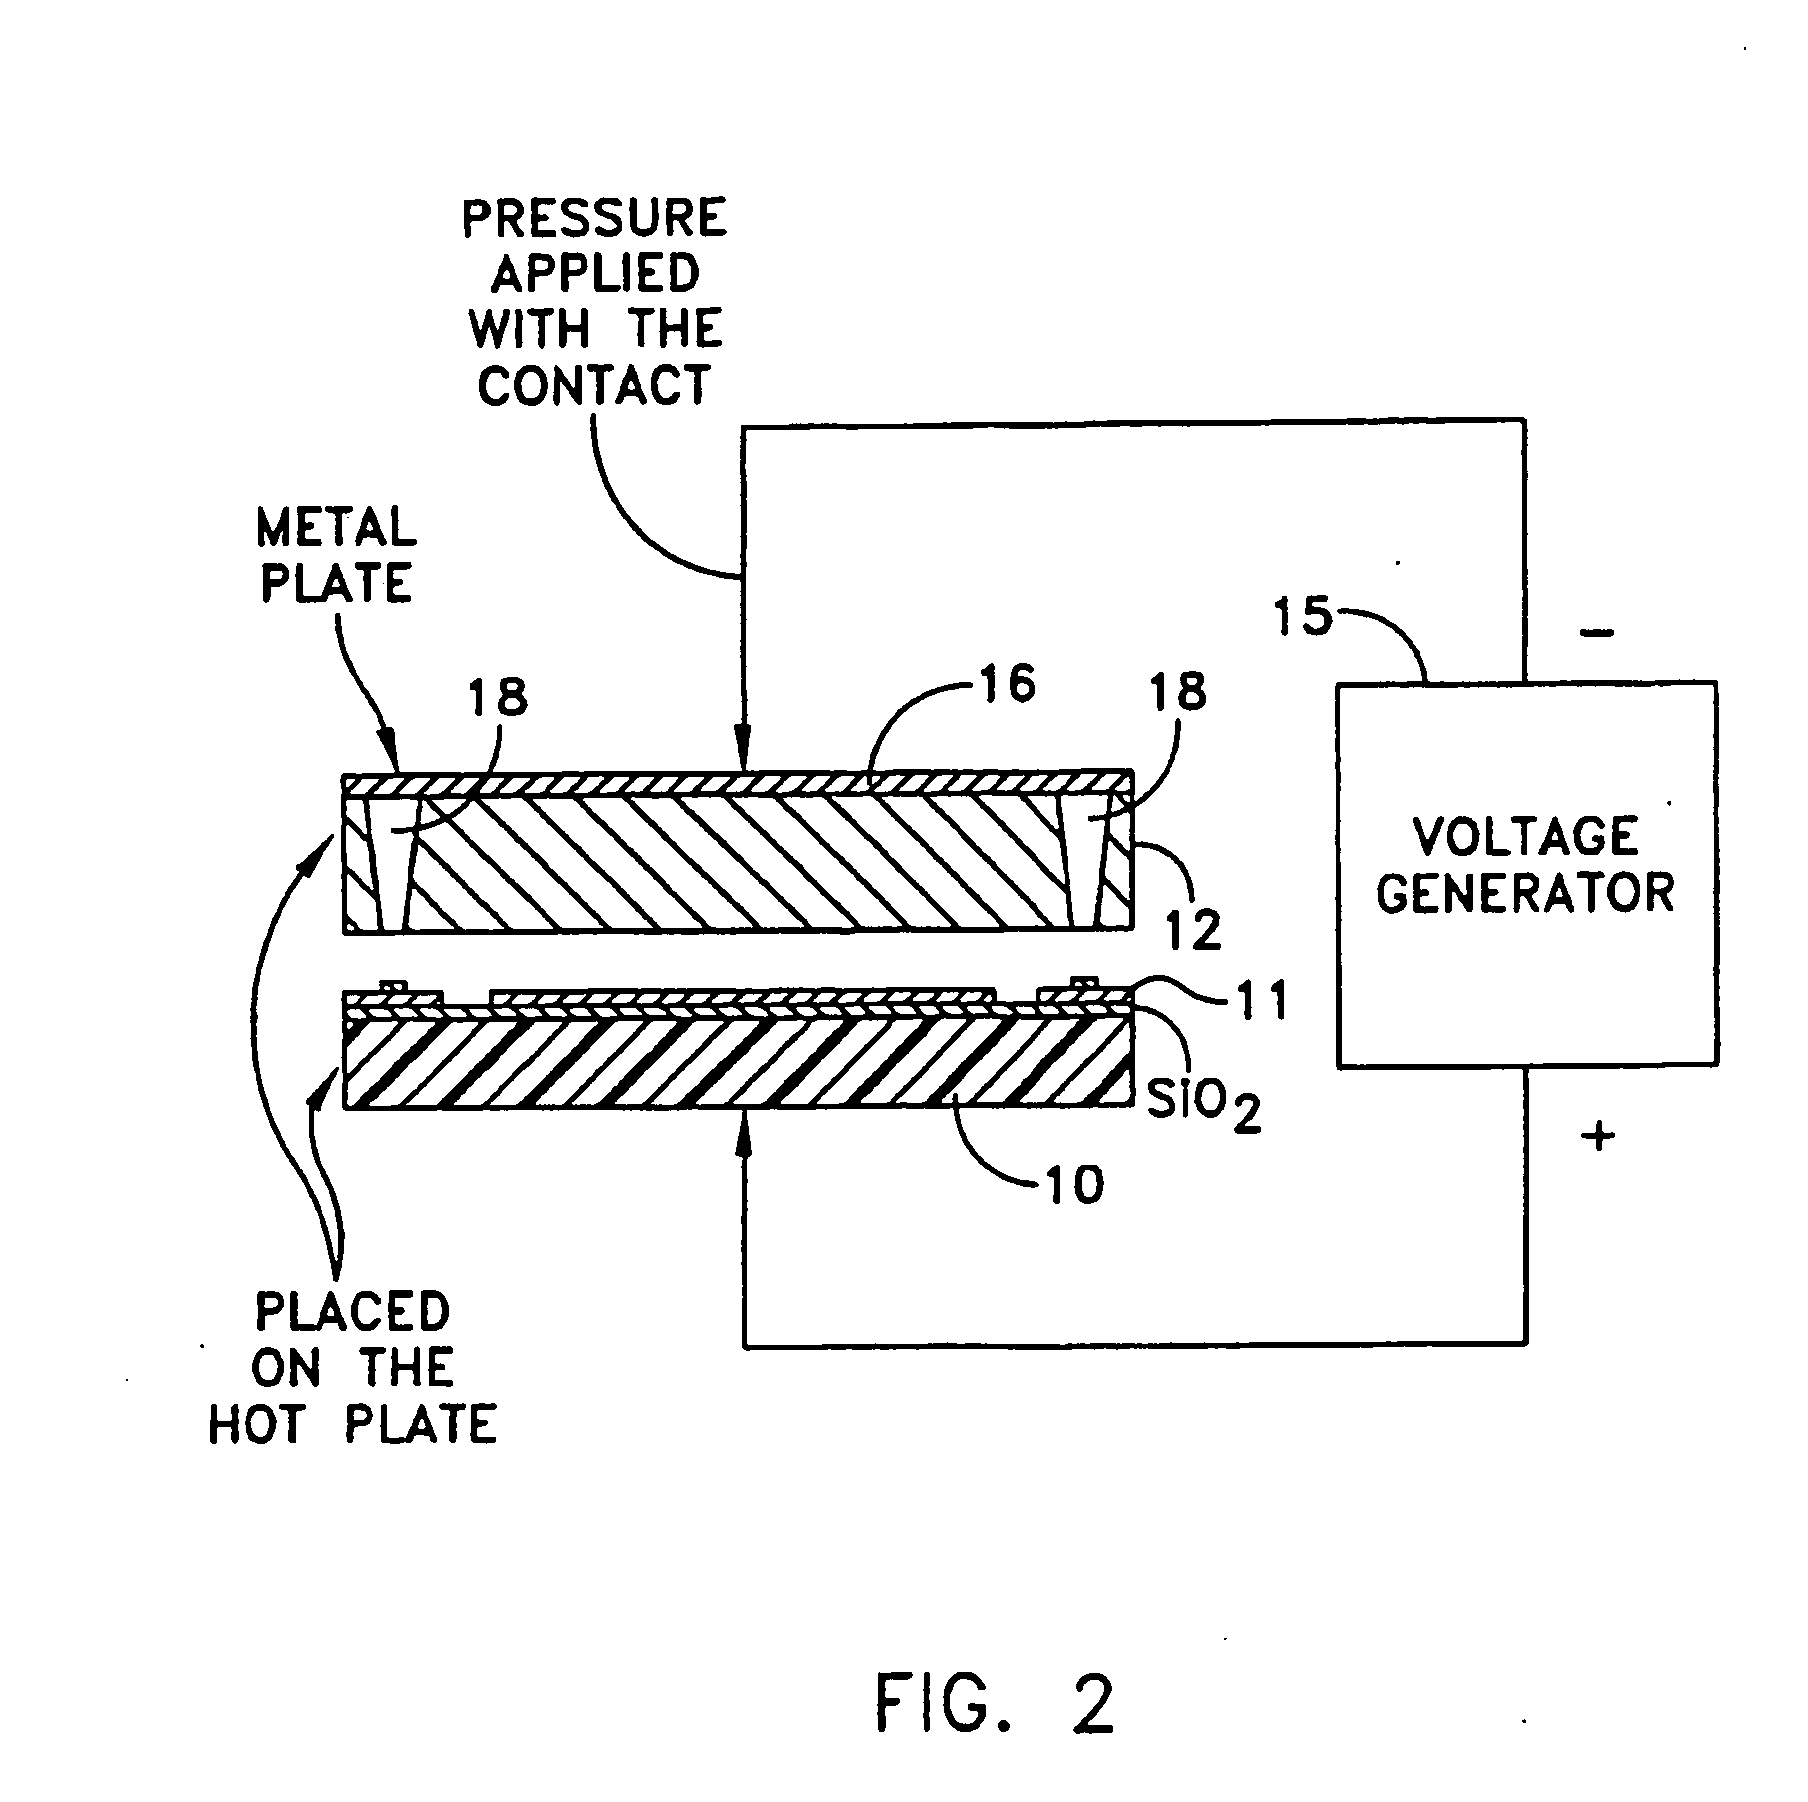 Method and apparatus for preventing catastrophic contact failure in ultra high temperature piezoresistive sensors and transducers